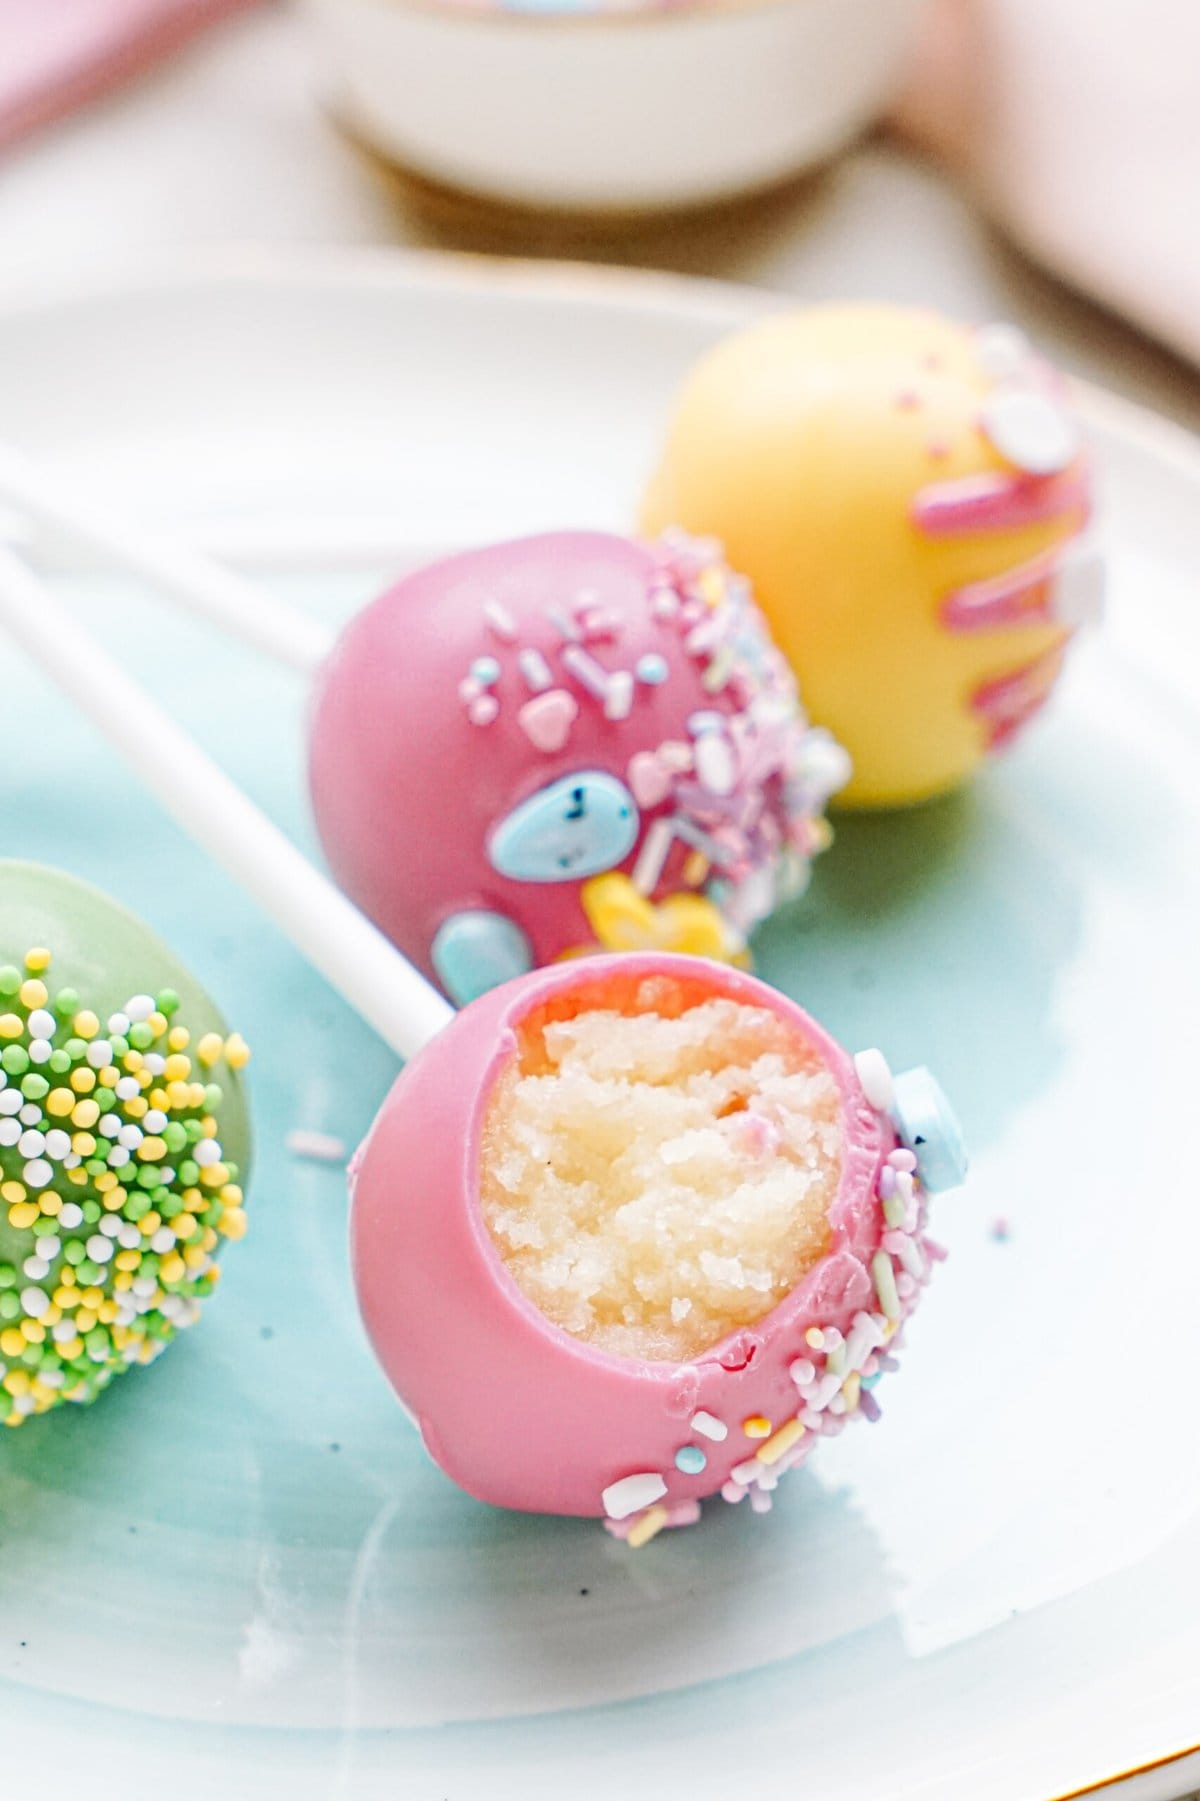 Colorful cake pops with bite taken out of one, decorated with sprinkles, displayed on a plate.